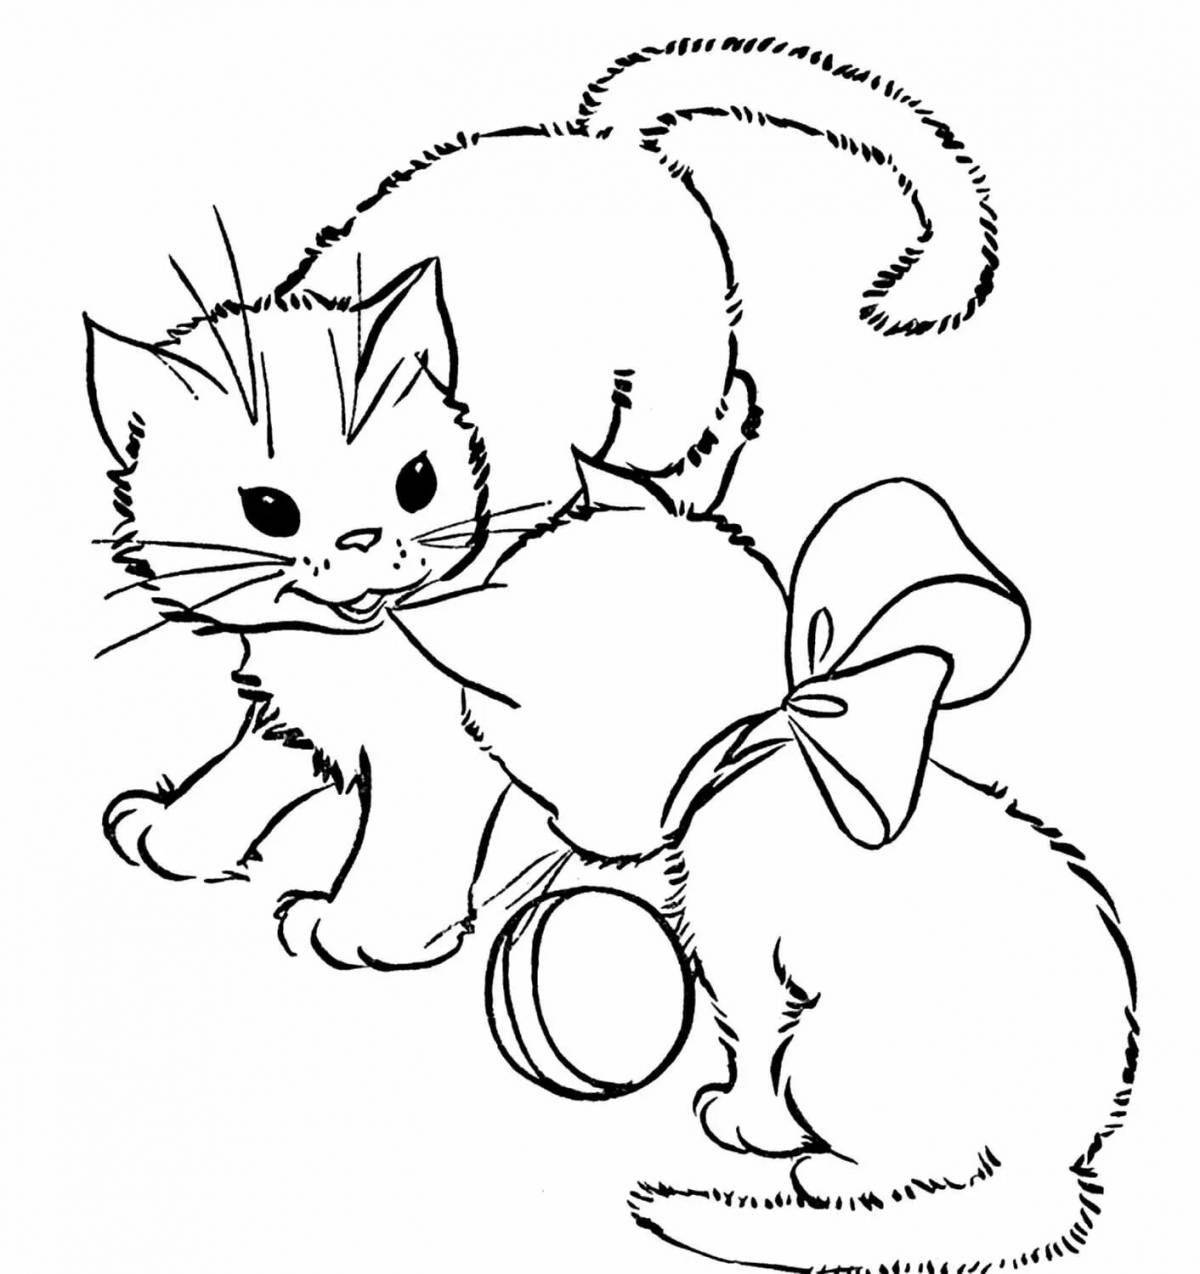 Fun coloring kitty for kids 6-7 years old